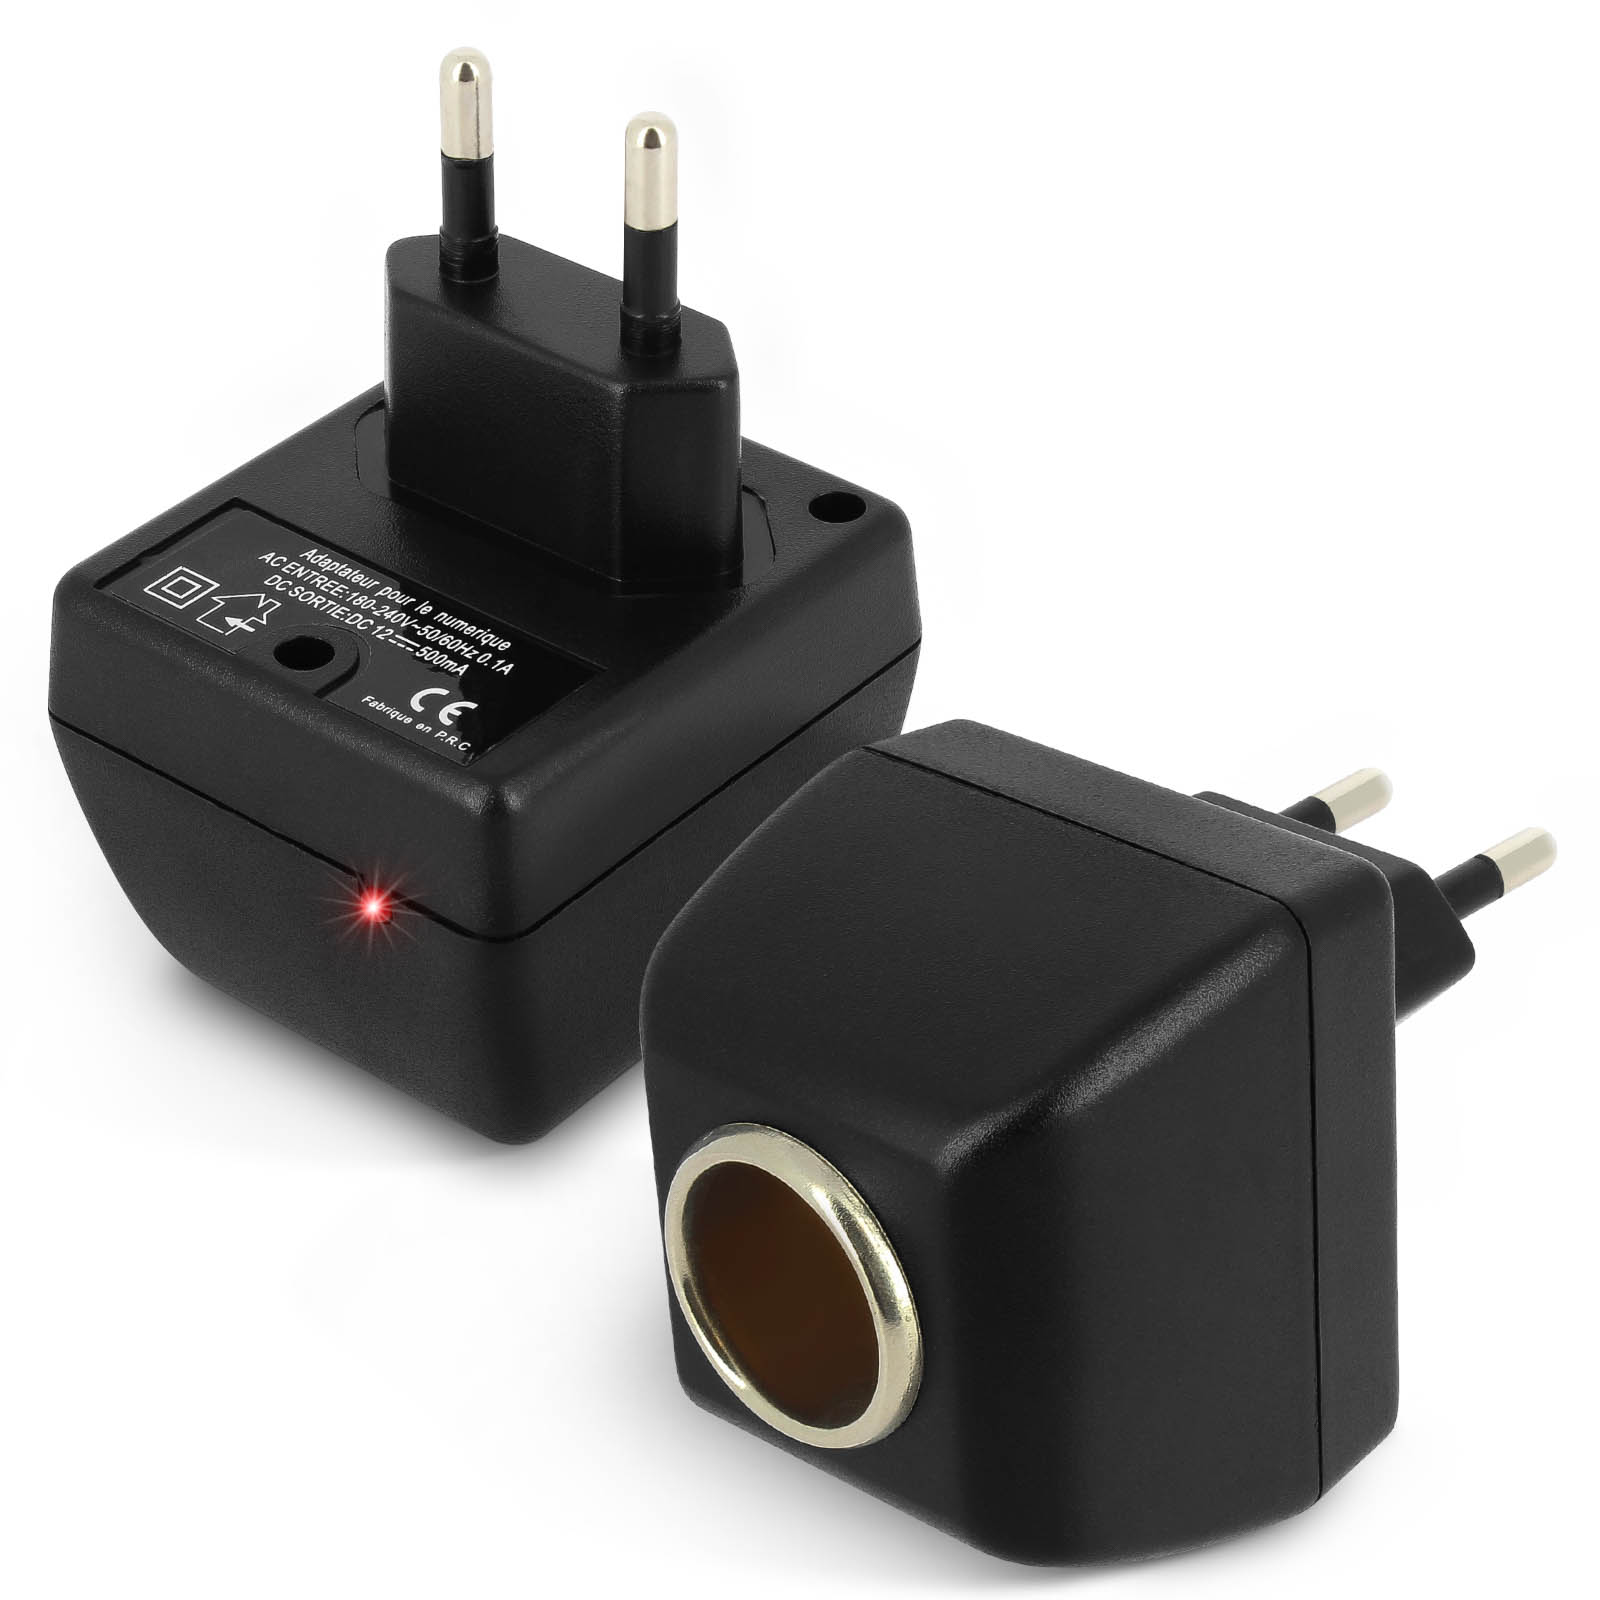 Accessoire : Chargeur 230V/12V - 500mA